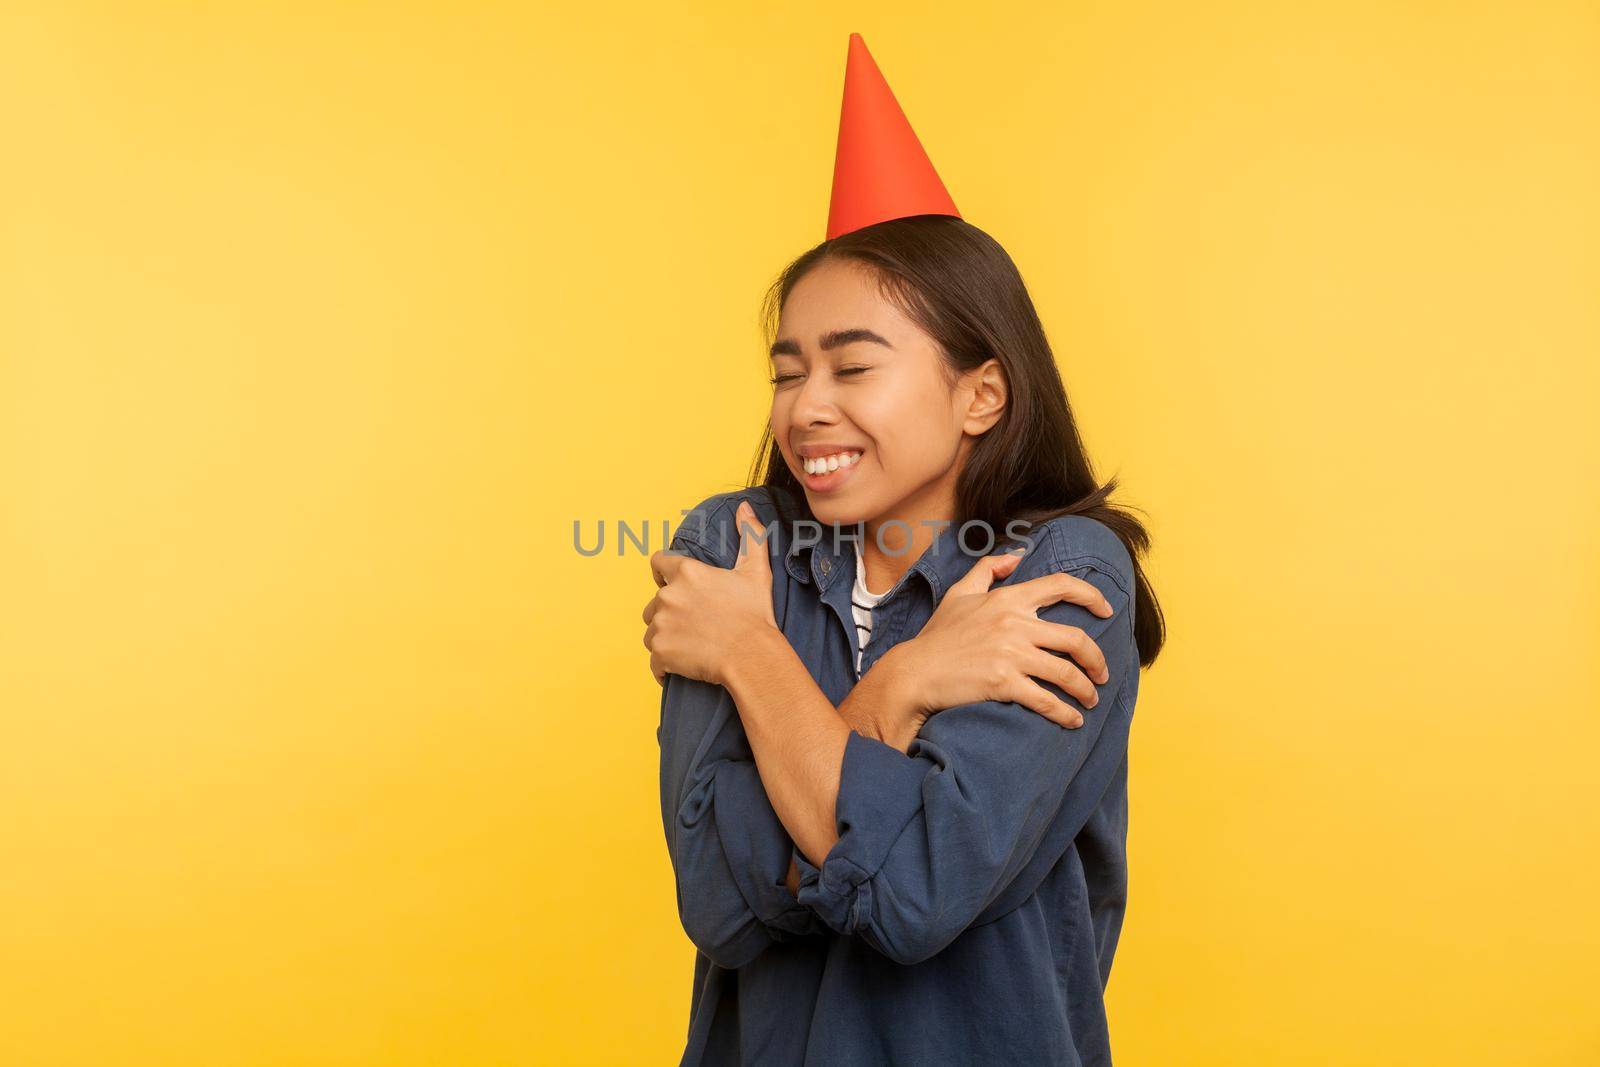 Happy birthday to me. Portrait of girl in denim shirt and with funny party cone on head embracing herself, celebrating successful event alone but happy. studio shot isolated on yellow background